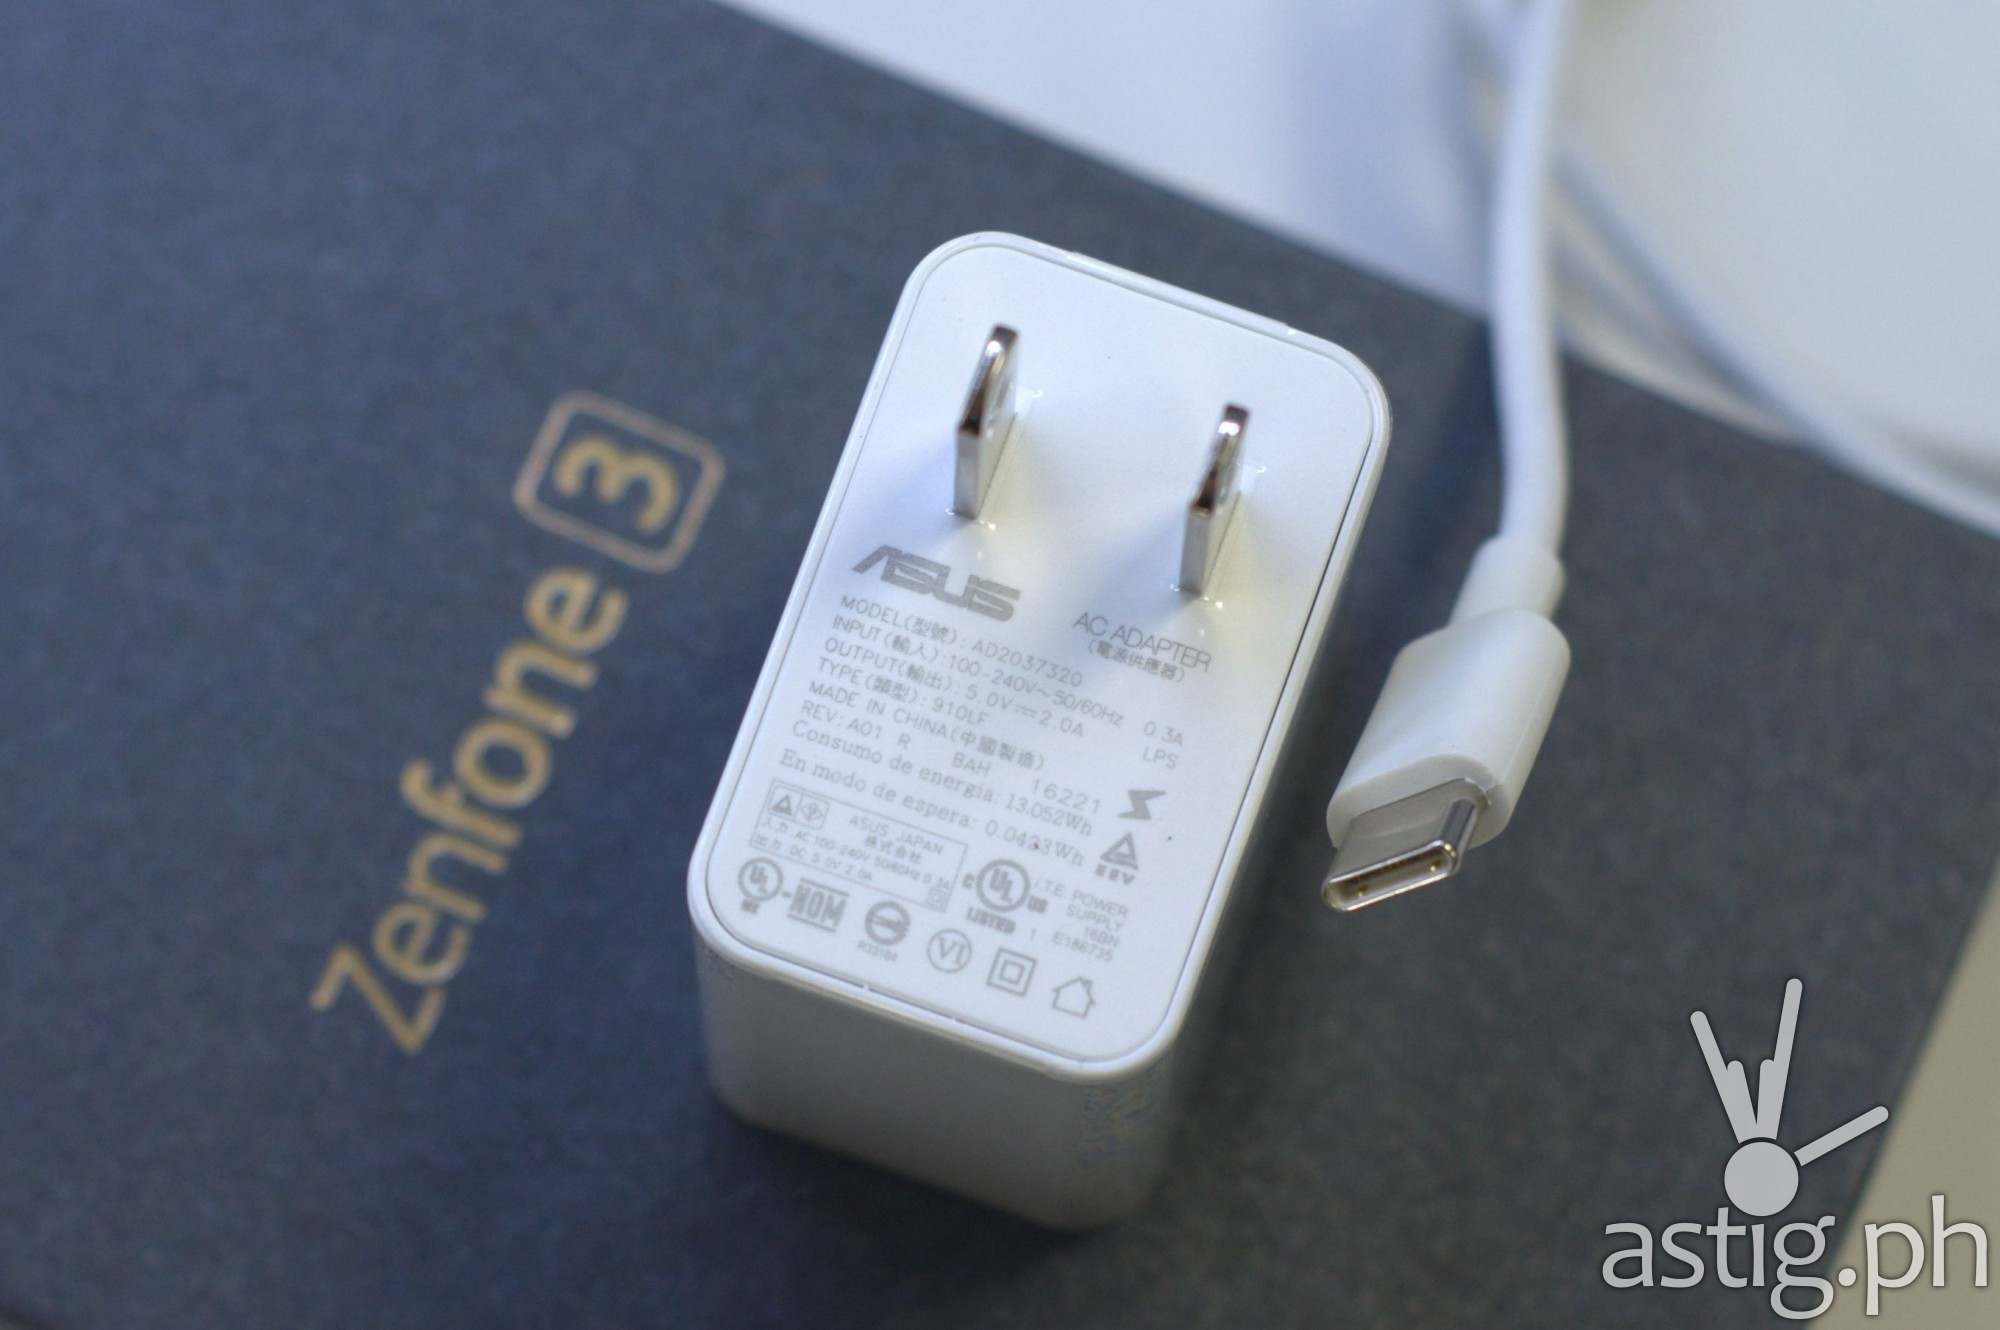 ASUS ZenFone 3 USB Type-C cable and plug